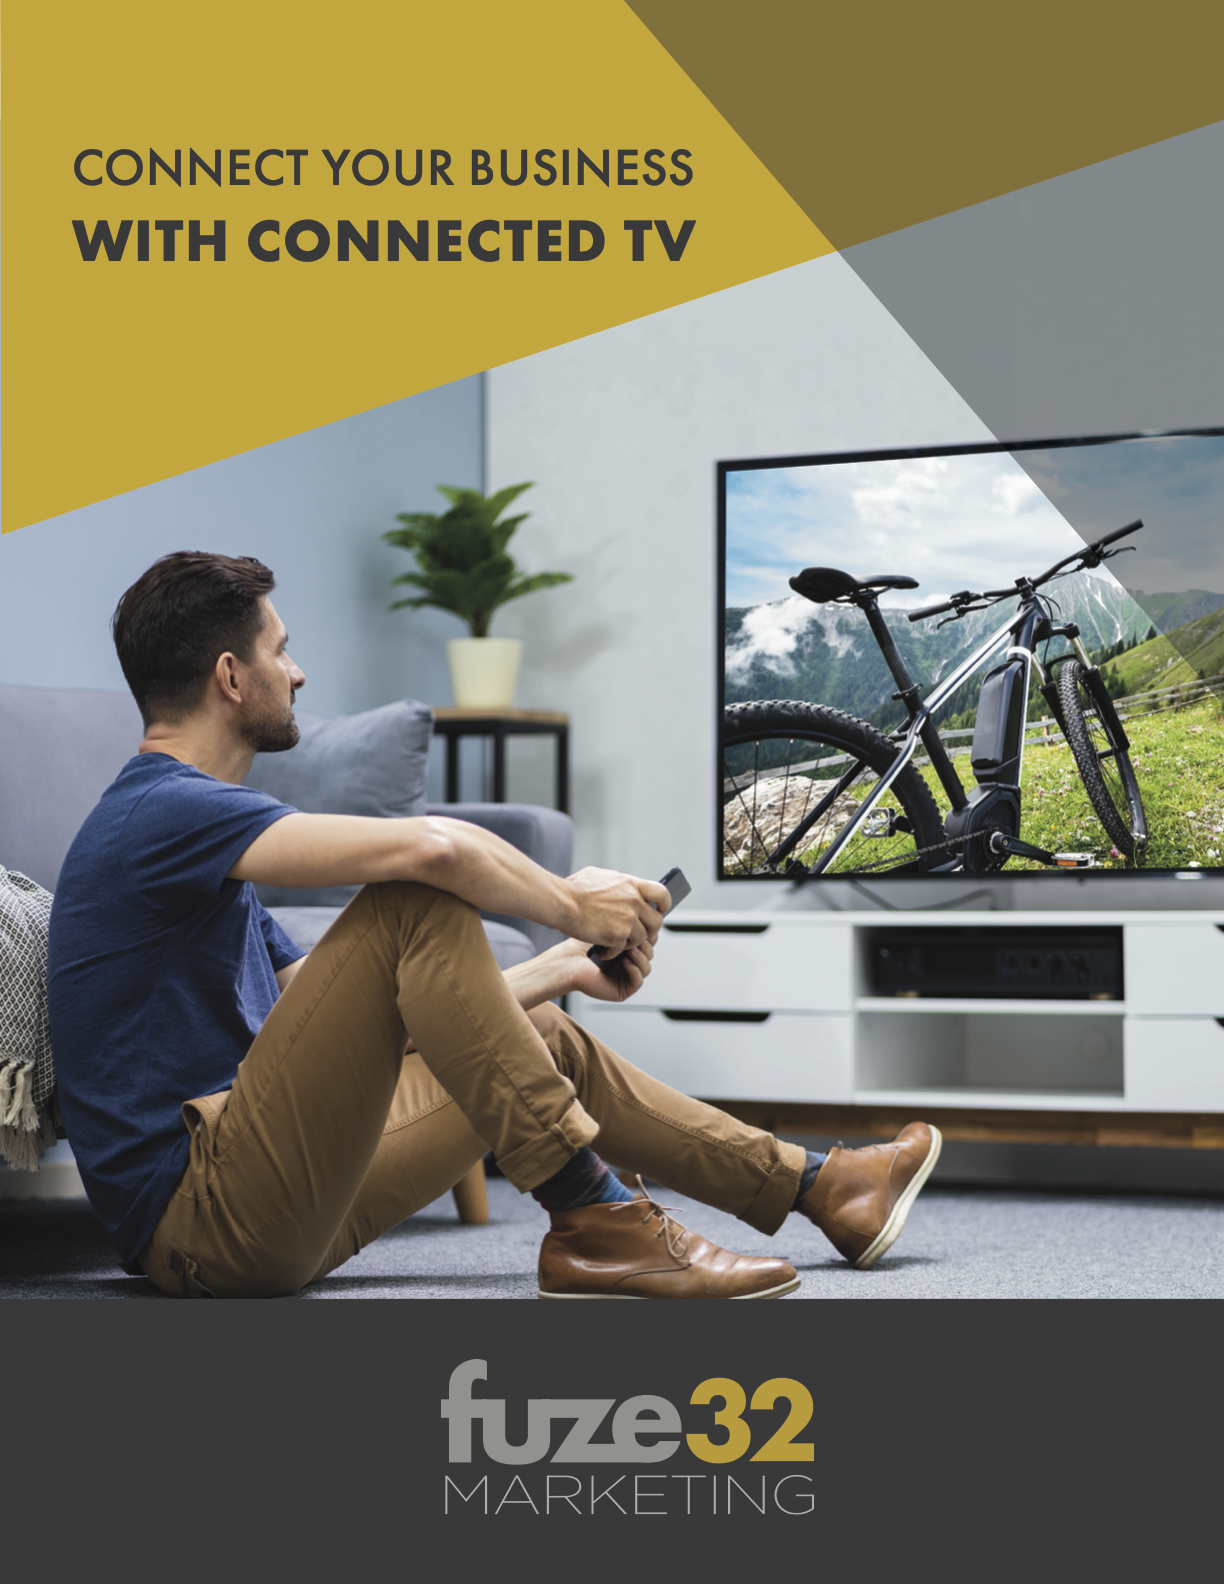 Connected TV eBook - FINAL